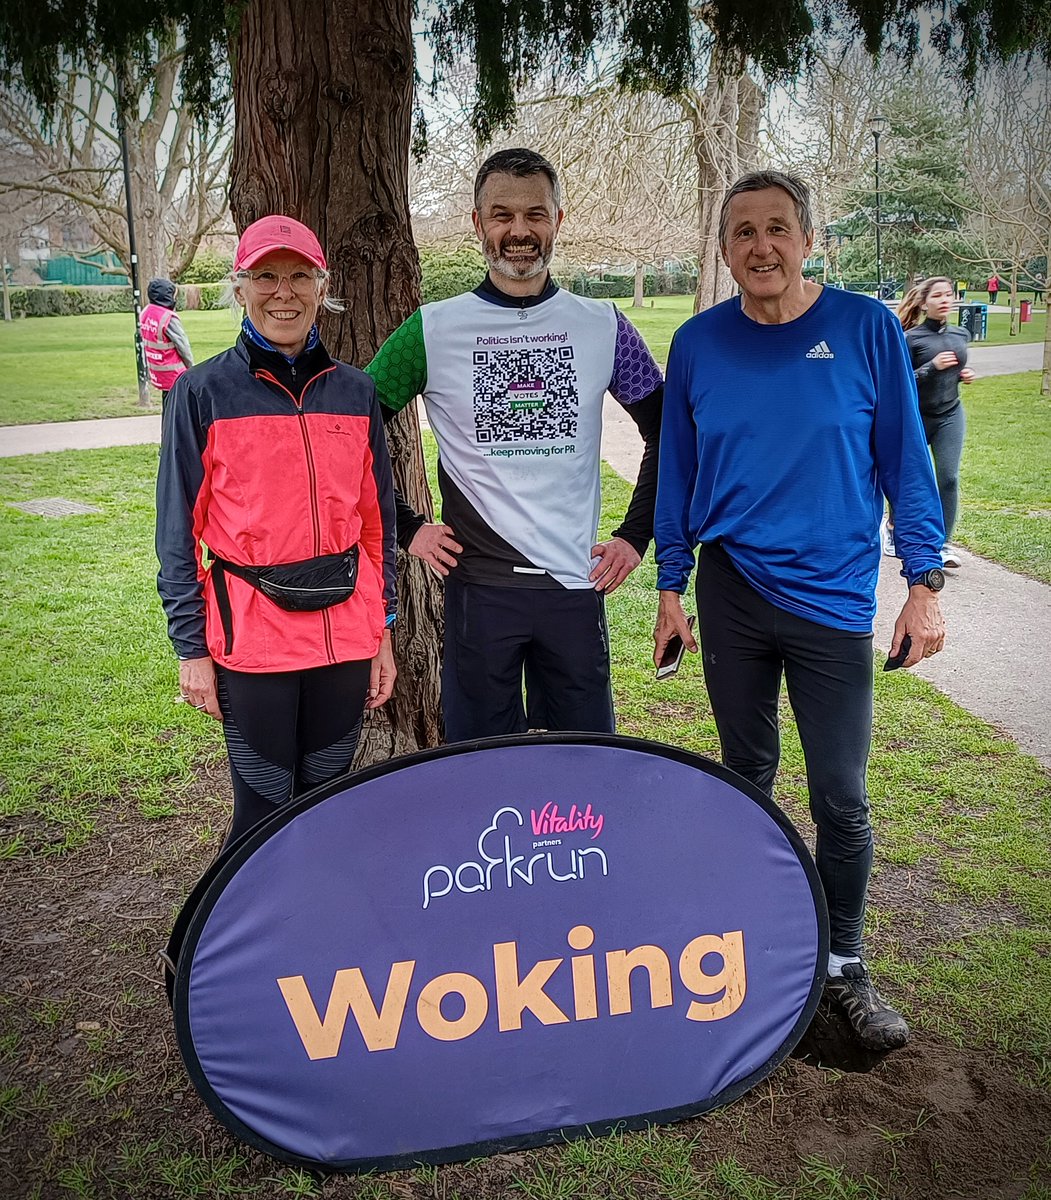 ...then there were three!

Lovely bumping into @RogerSWilson & Gill this morning for another muddy @parkrunUK   
😊😊😊😊😊😊😊😊😊😊😊😊

🏃‍♂️🏃‍♂️🏃‍♂️#KeepMovingForPR🏃‍♂️🏃‍♂️🏃‍♂️

@MakeVotesMatter
@MVMWoking
#WipeOutFPTP #PRDelivers